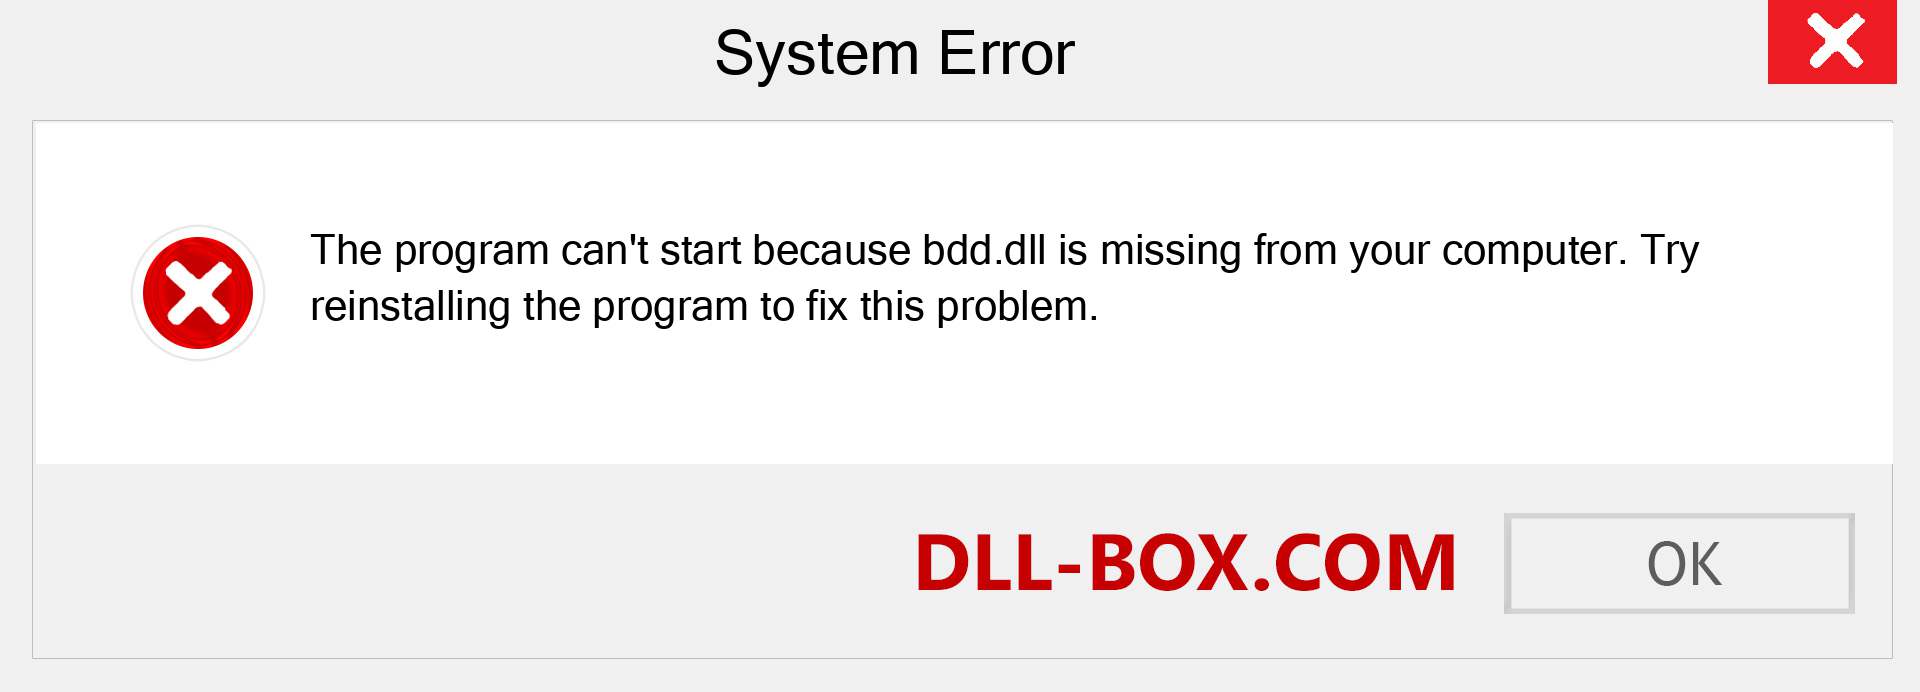  bdd.dll file is missing?. Download for Windows 7, 8, 10 - Fix  bdd dll Missing Error on Windows, photos, images